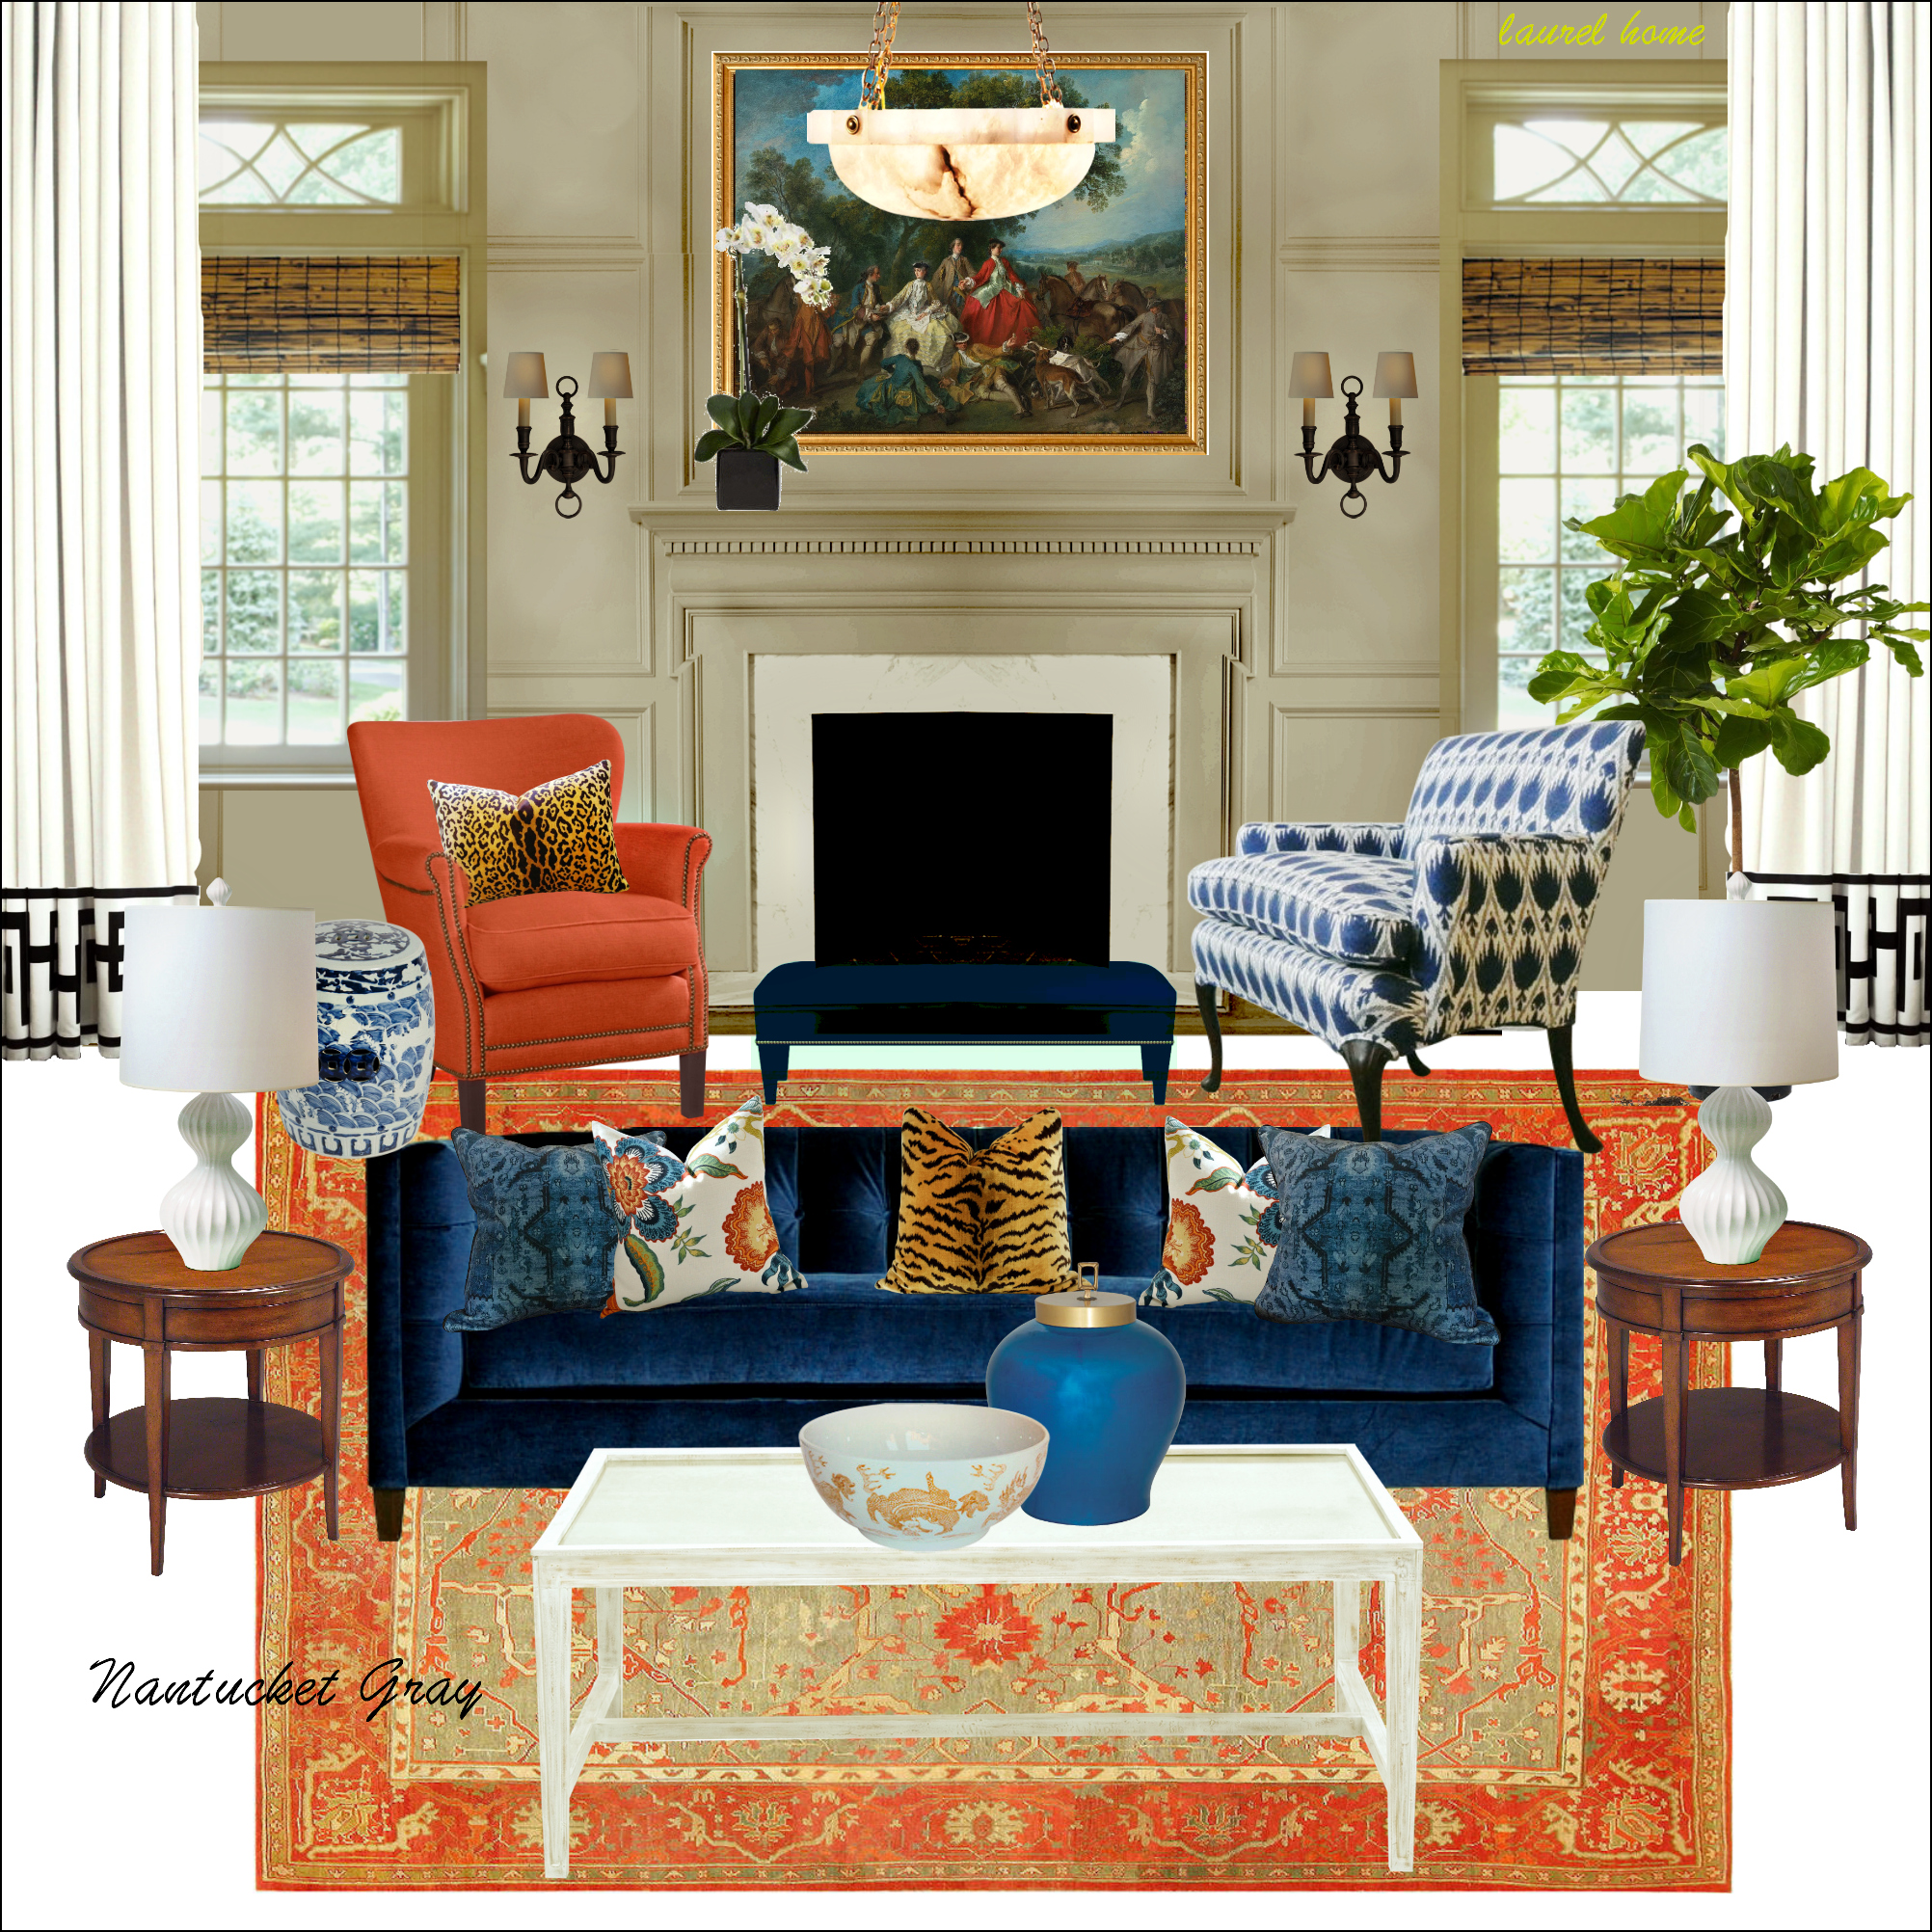 Nantucket gray - warm red and blue - unified interior color palette